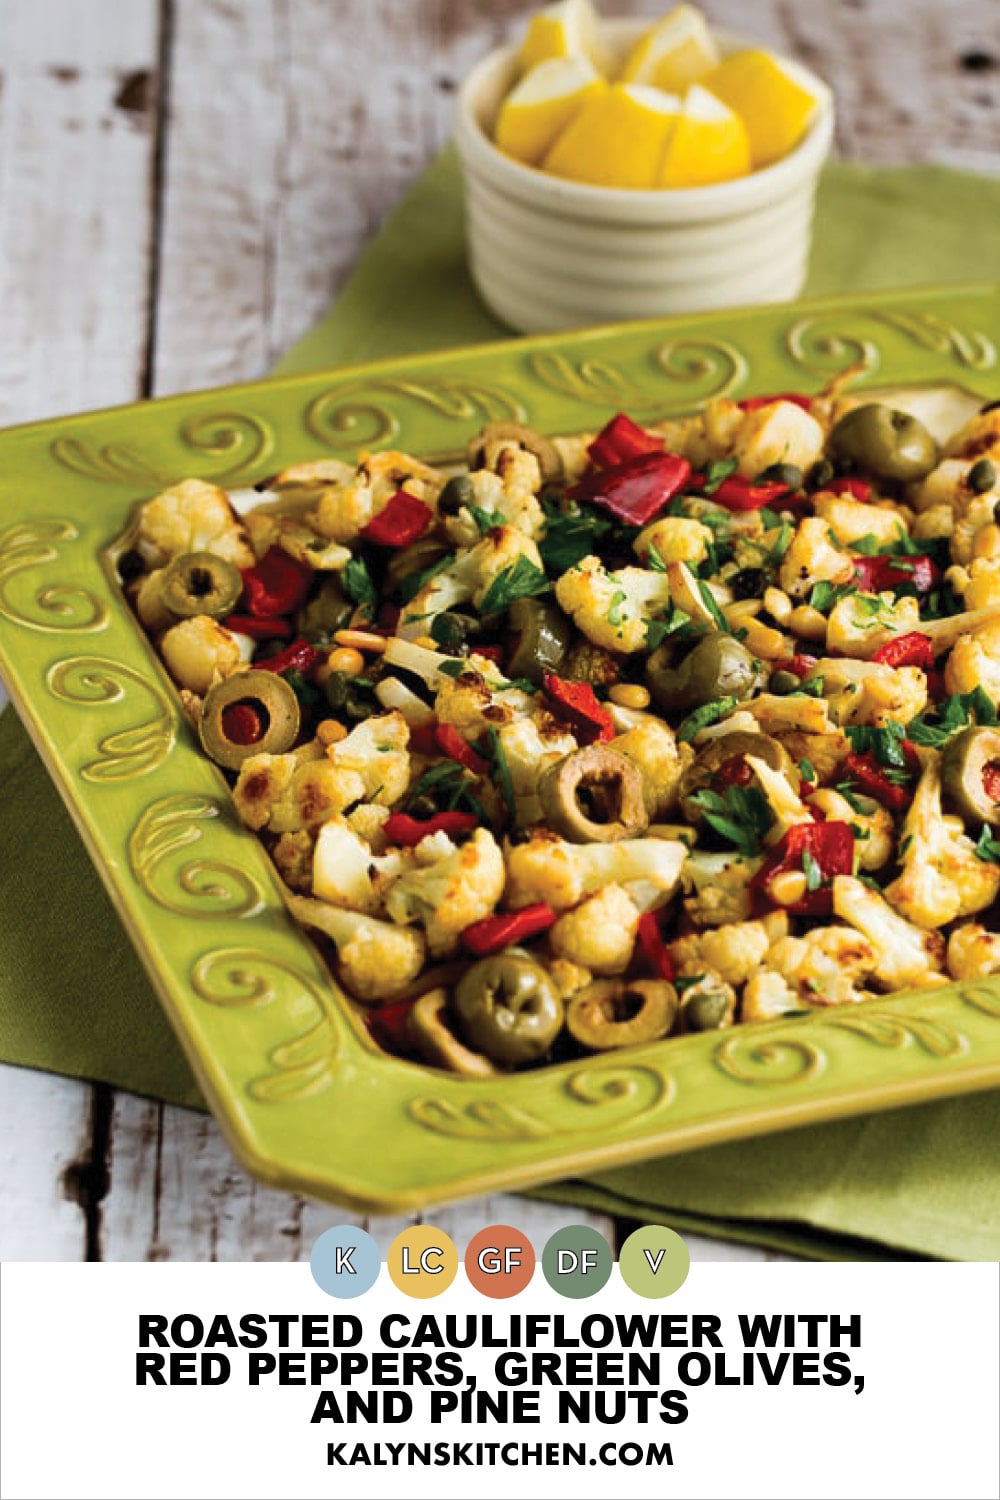 Pinterest image of Roasted Cauliflower with Red Peppers, Green Olives, and Pine Nuts